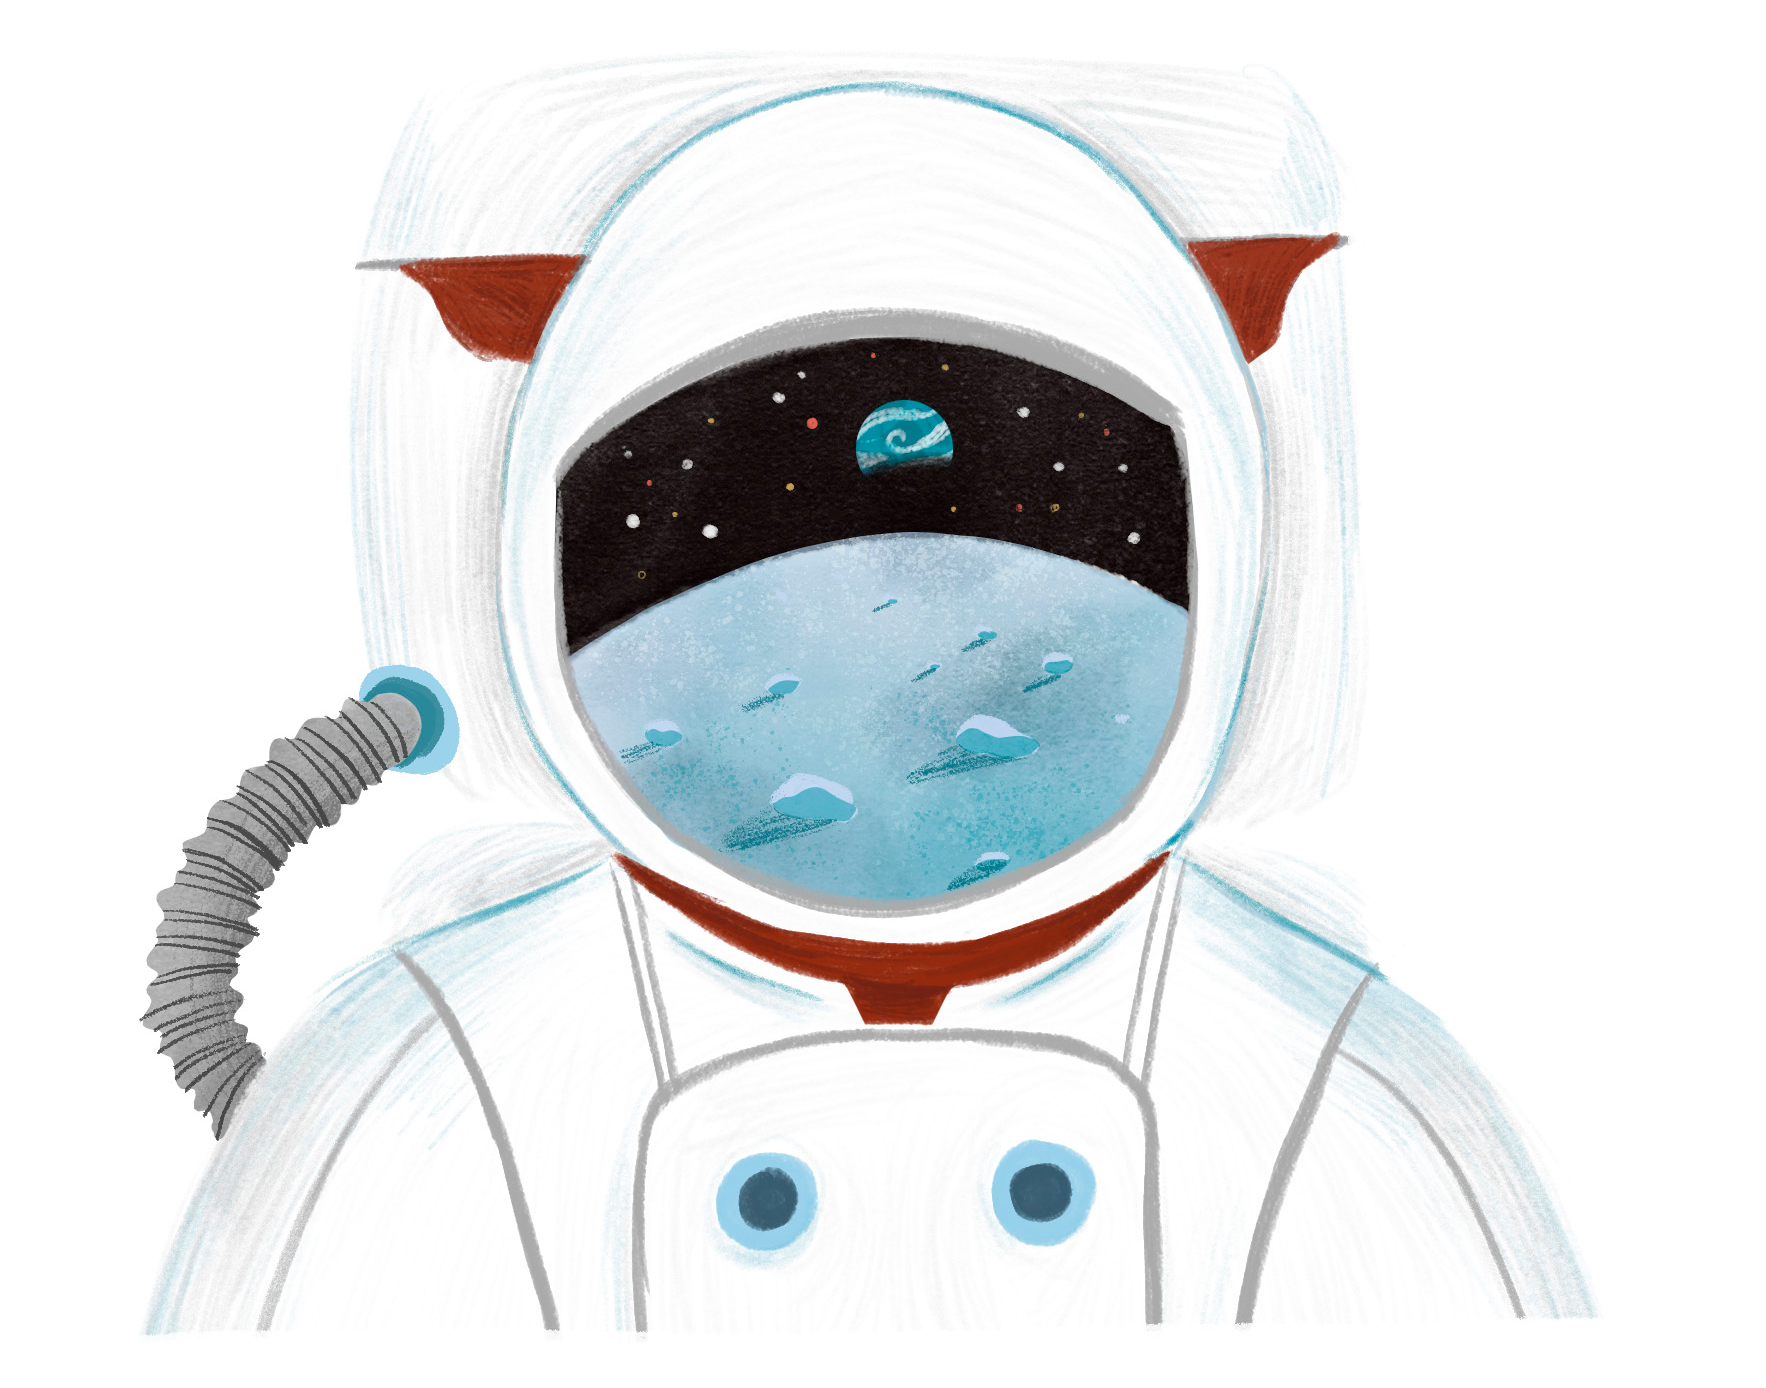 An illustration of astronaut Neil Armstrong in his space suit